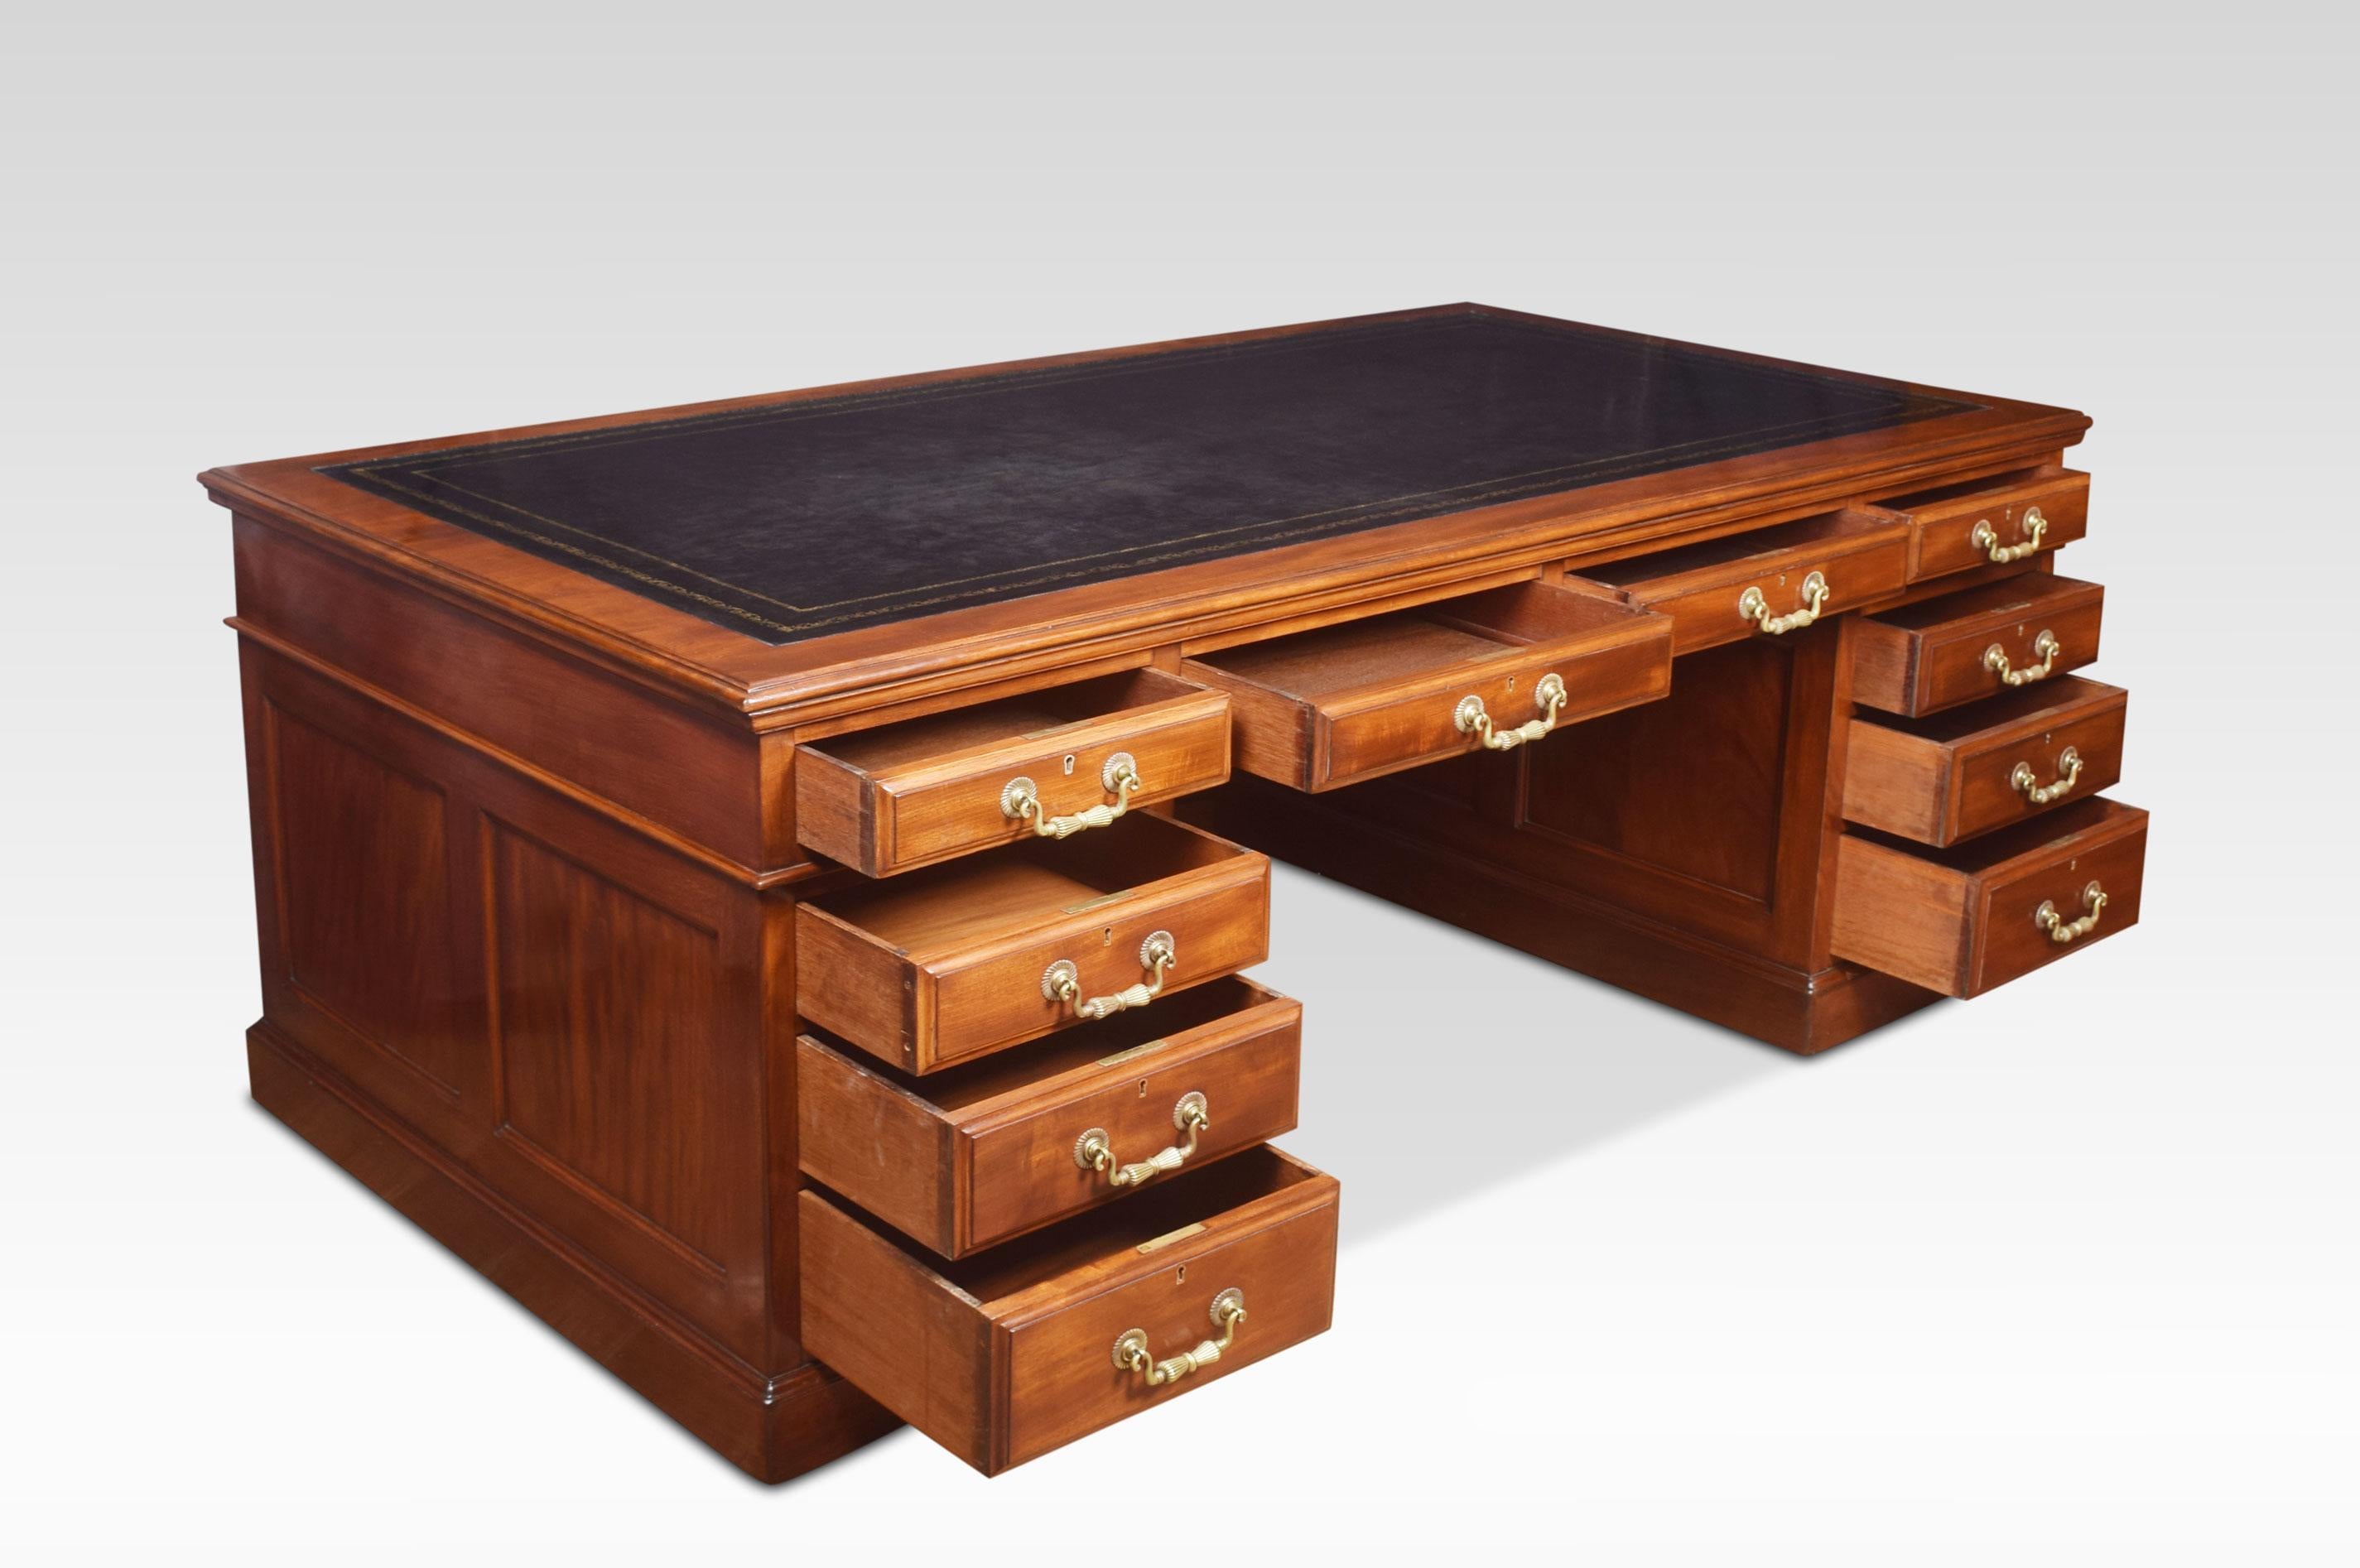 19th century mahogany partners ooor library desk, the very large rectangular black hide top with a gilt-tooled border enclosed by a moulded edge over an arrangement of four frieze drawers fitted with bold brass tooled handles. Above two large